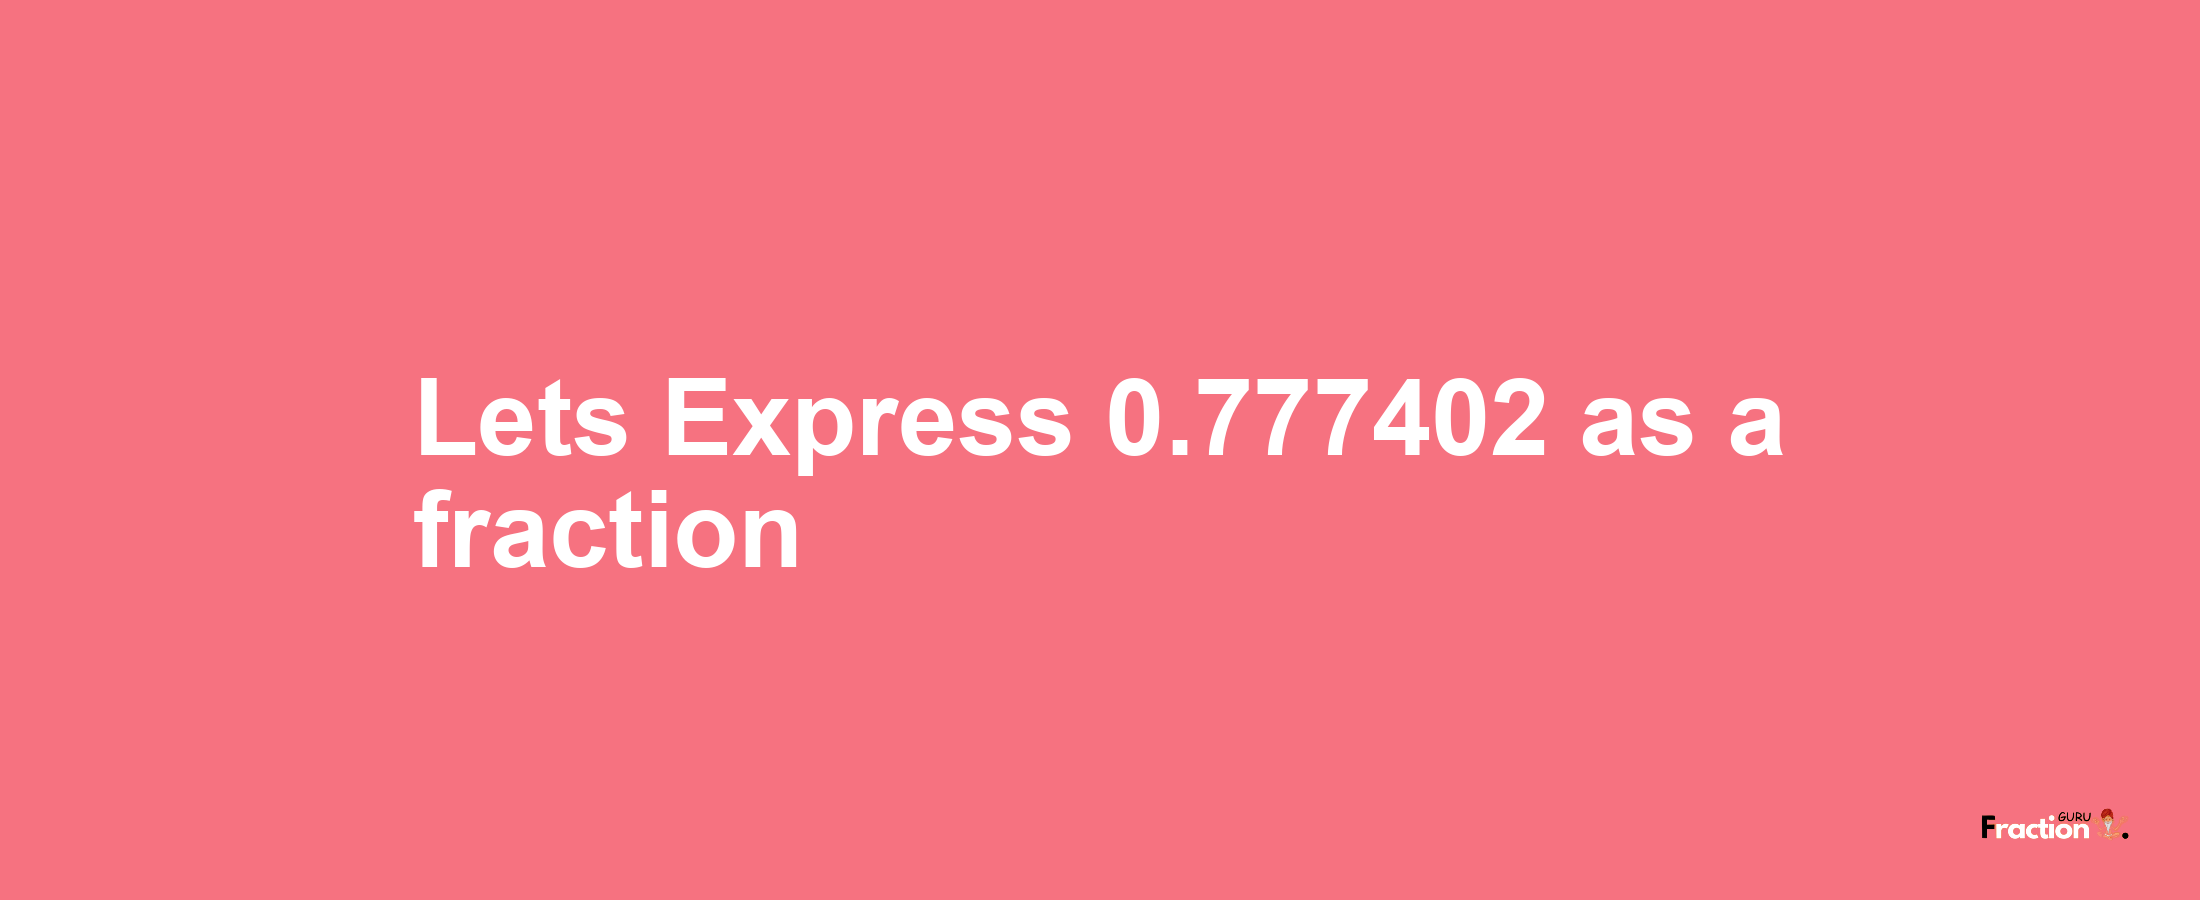 Lets Express 0.777402 as afraction